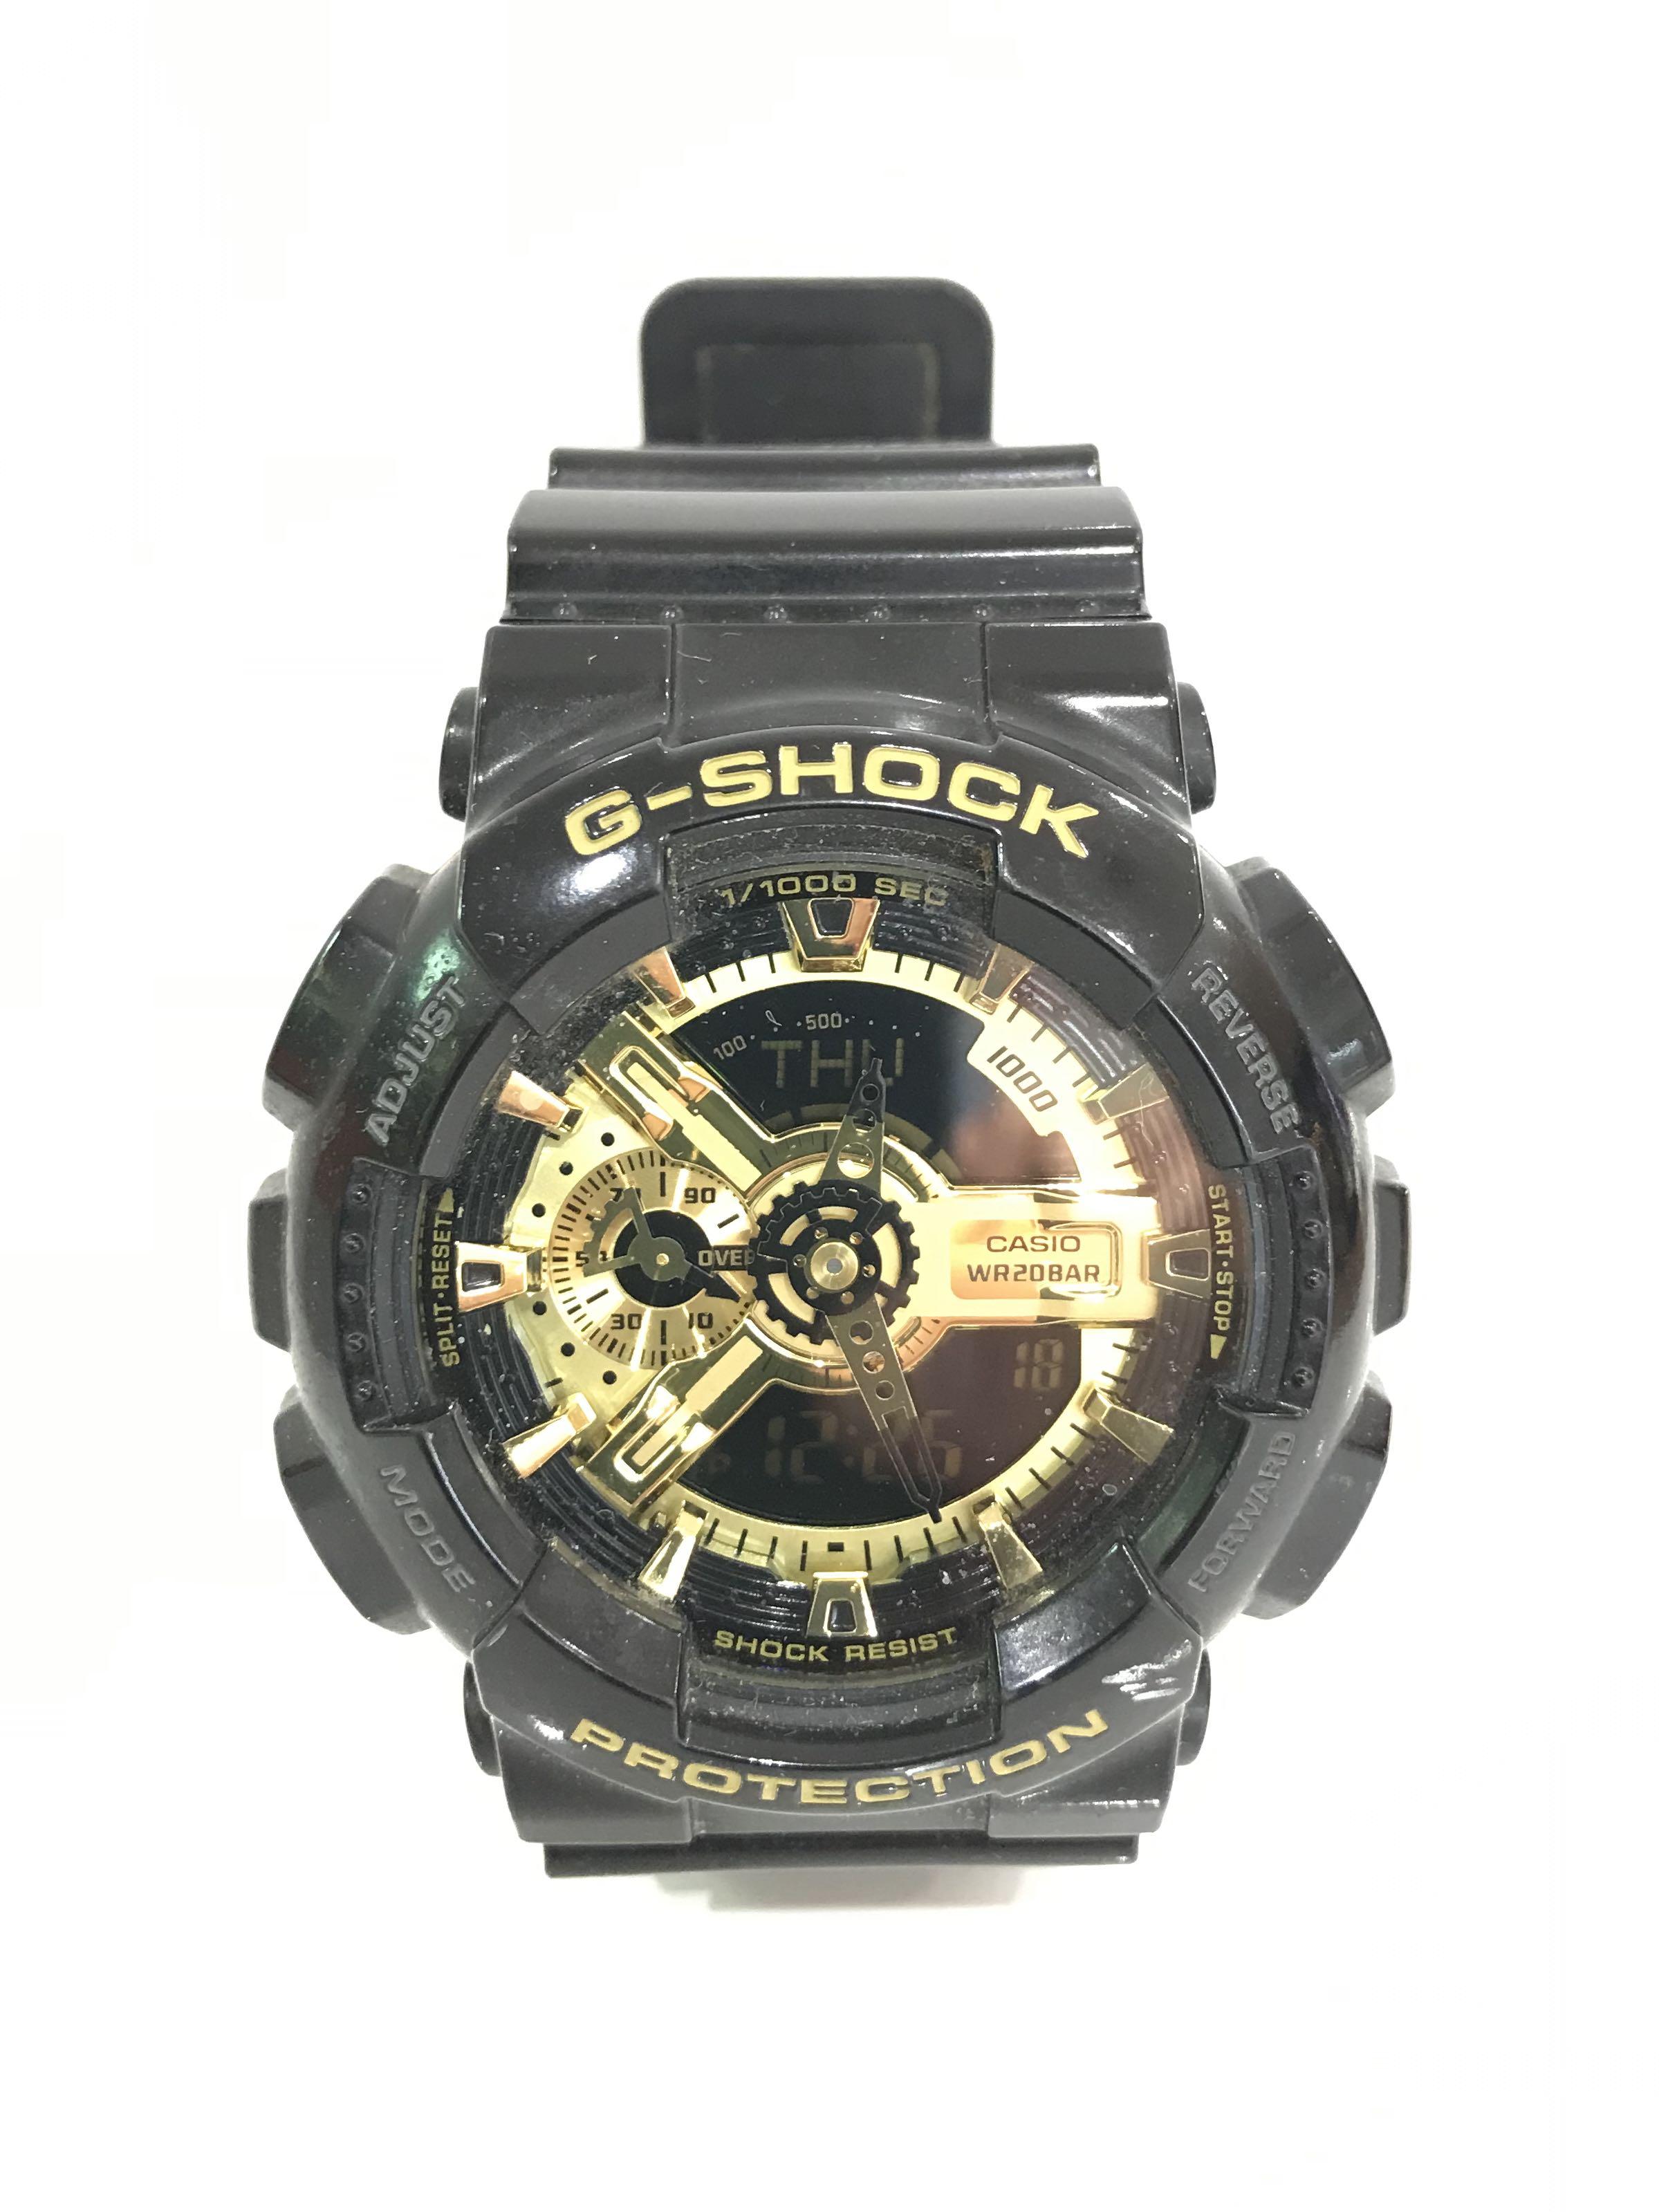 G-Shock Watch BATTERY REPLACEMENT ., Mobile Phones & Gadgets, Wearables ...